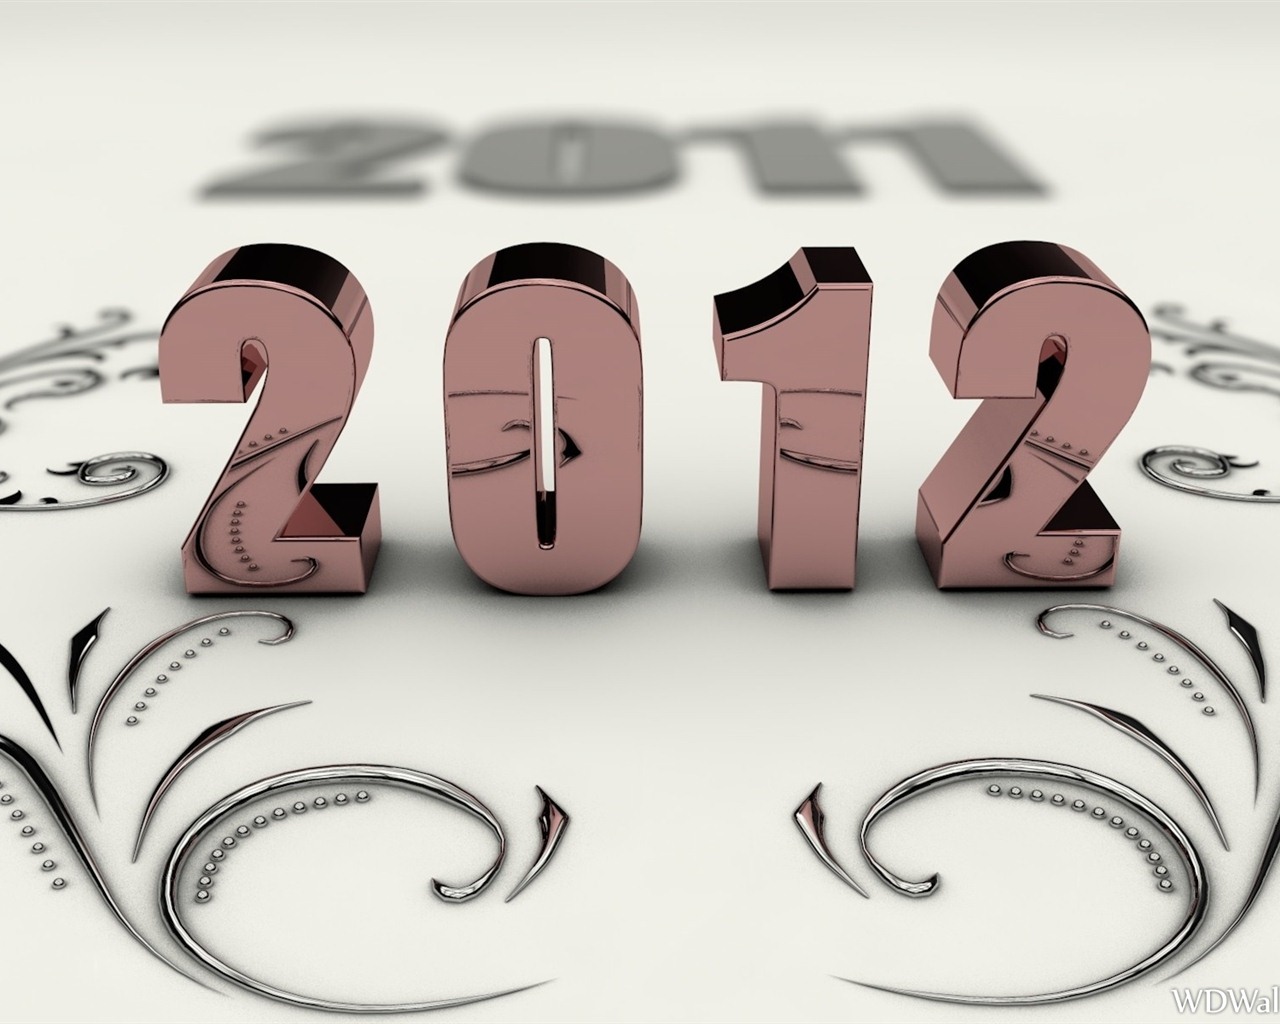 2012 New Year wallpapers (1) #8 - 1280x1024